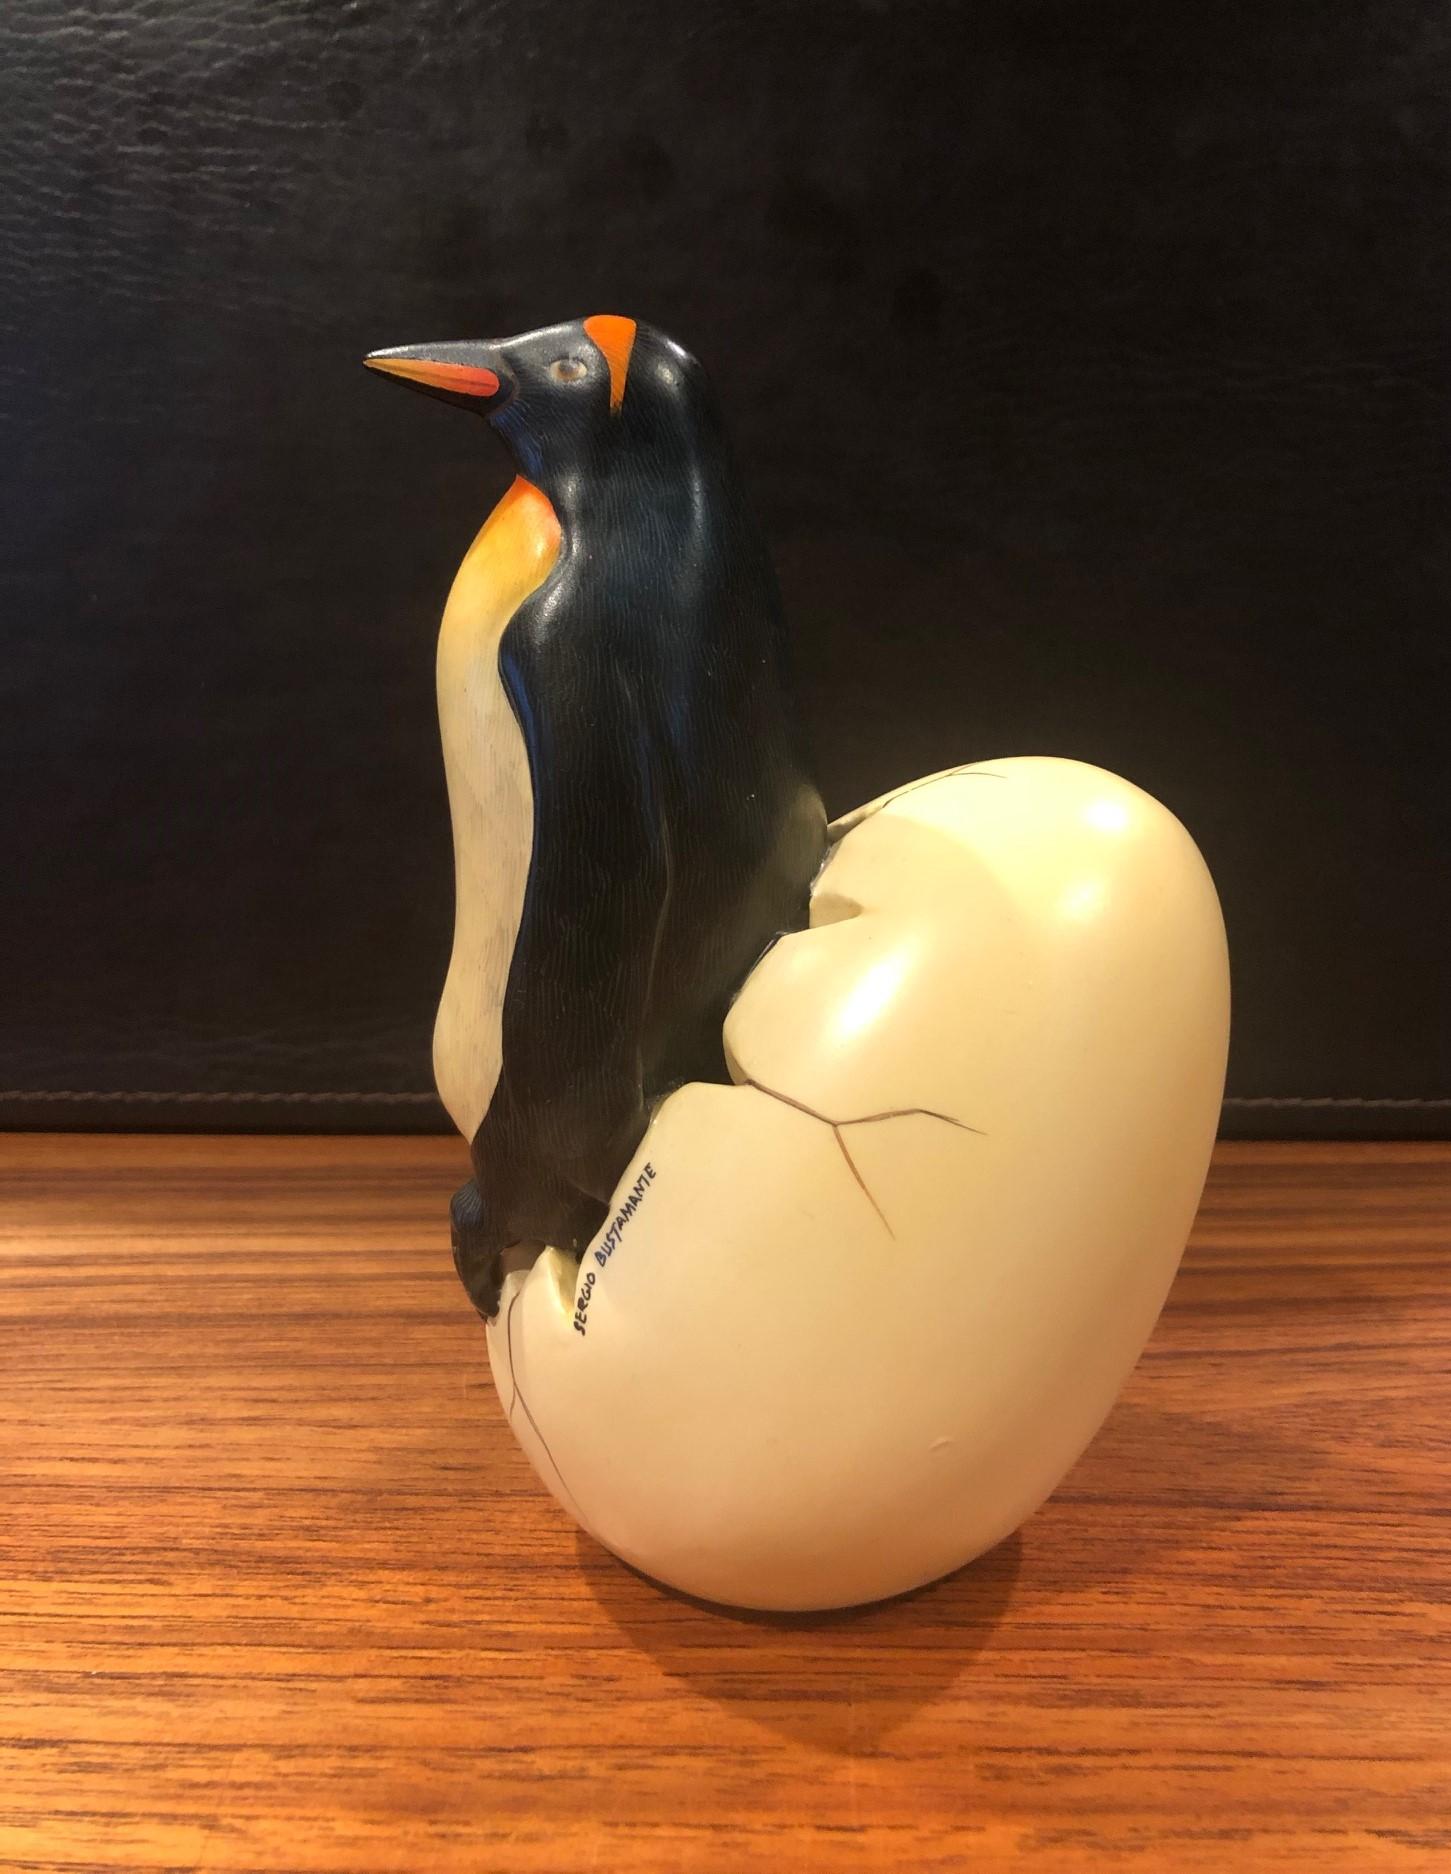 Mexican Whimsical Ceramic Hatching Penguin from Egg Sculpture by Sergio Bustamante